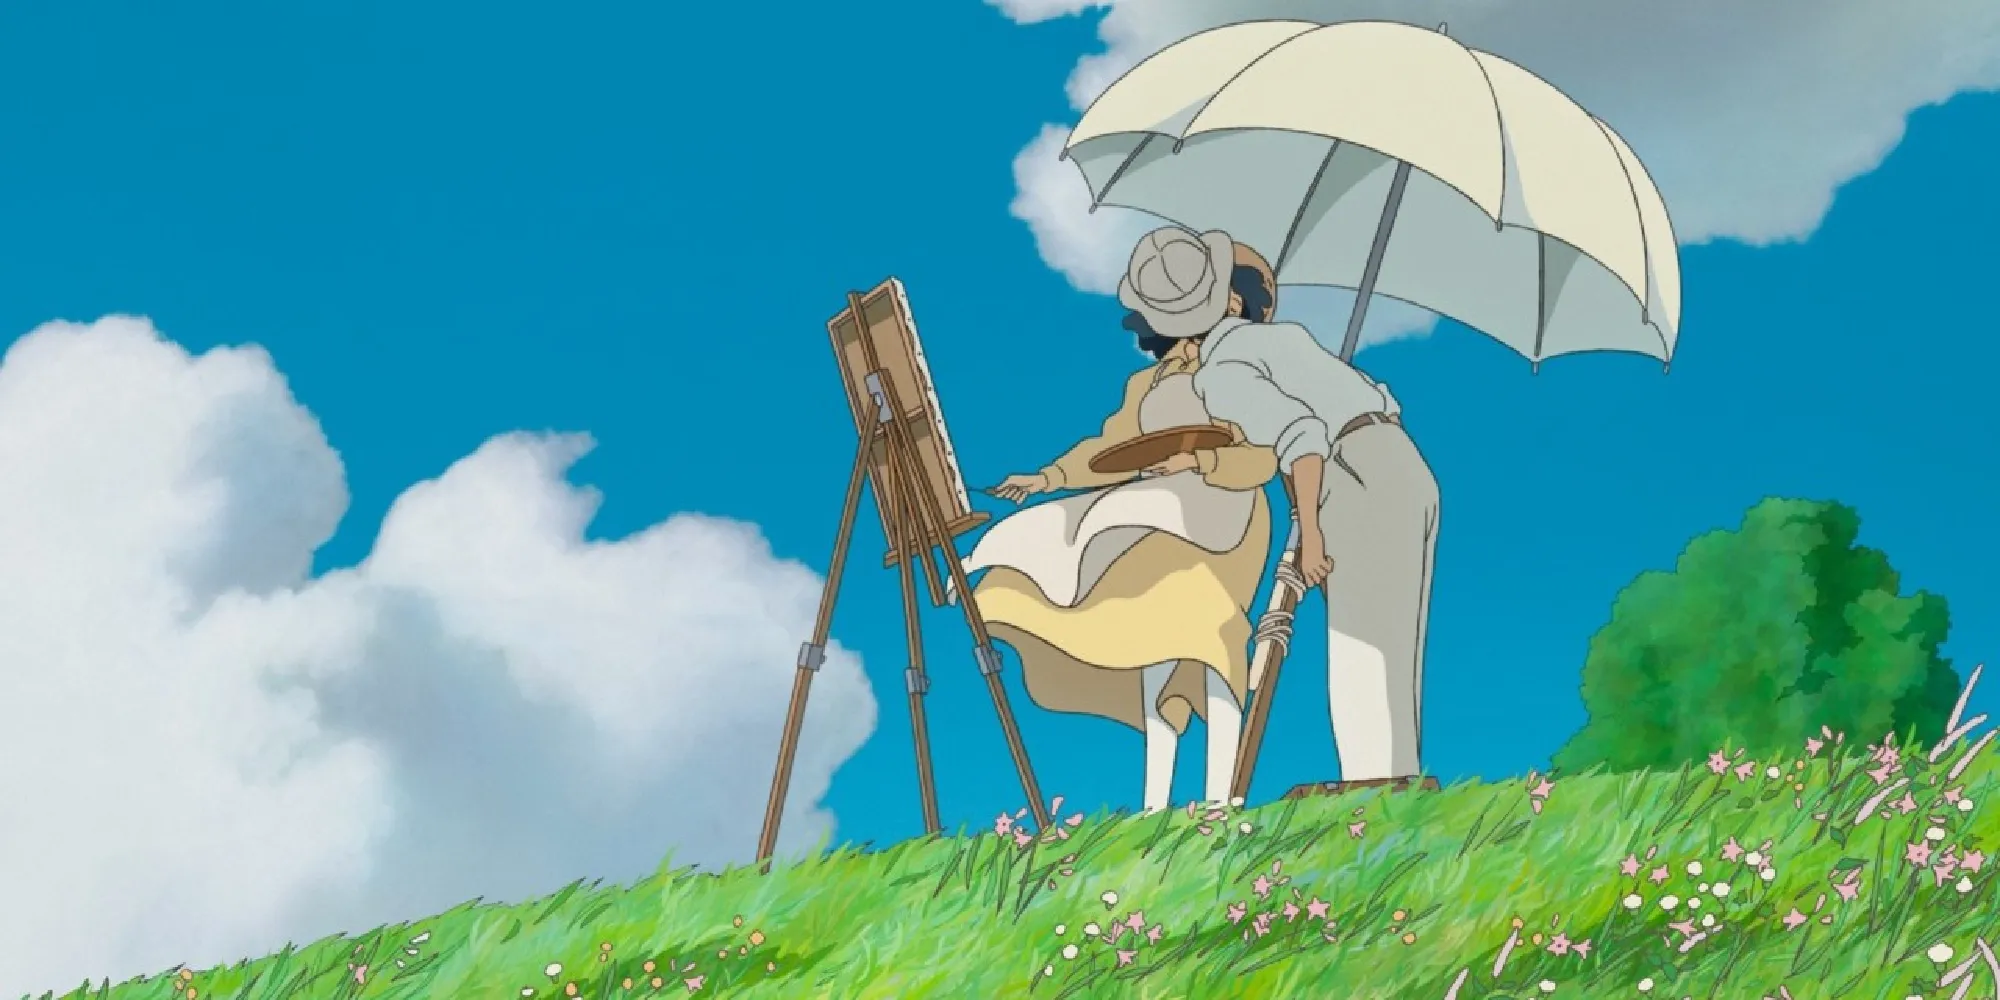 Jiro kissing Naoko on the hill where she paints in the Wind Rises